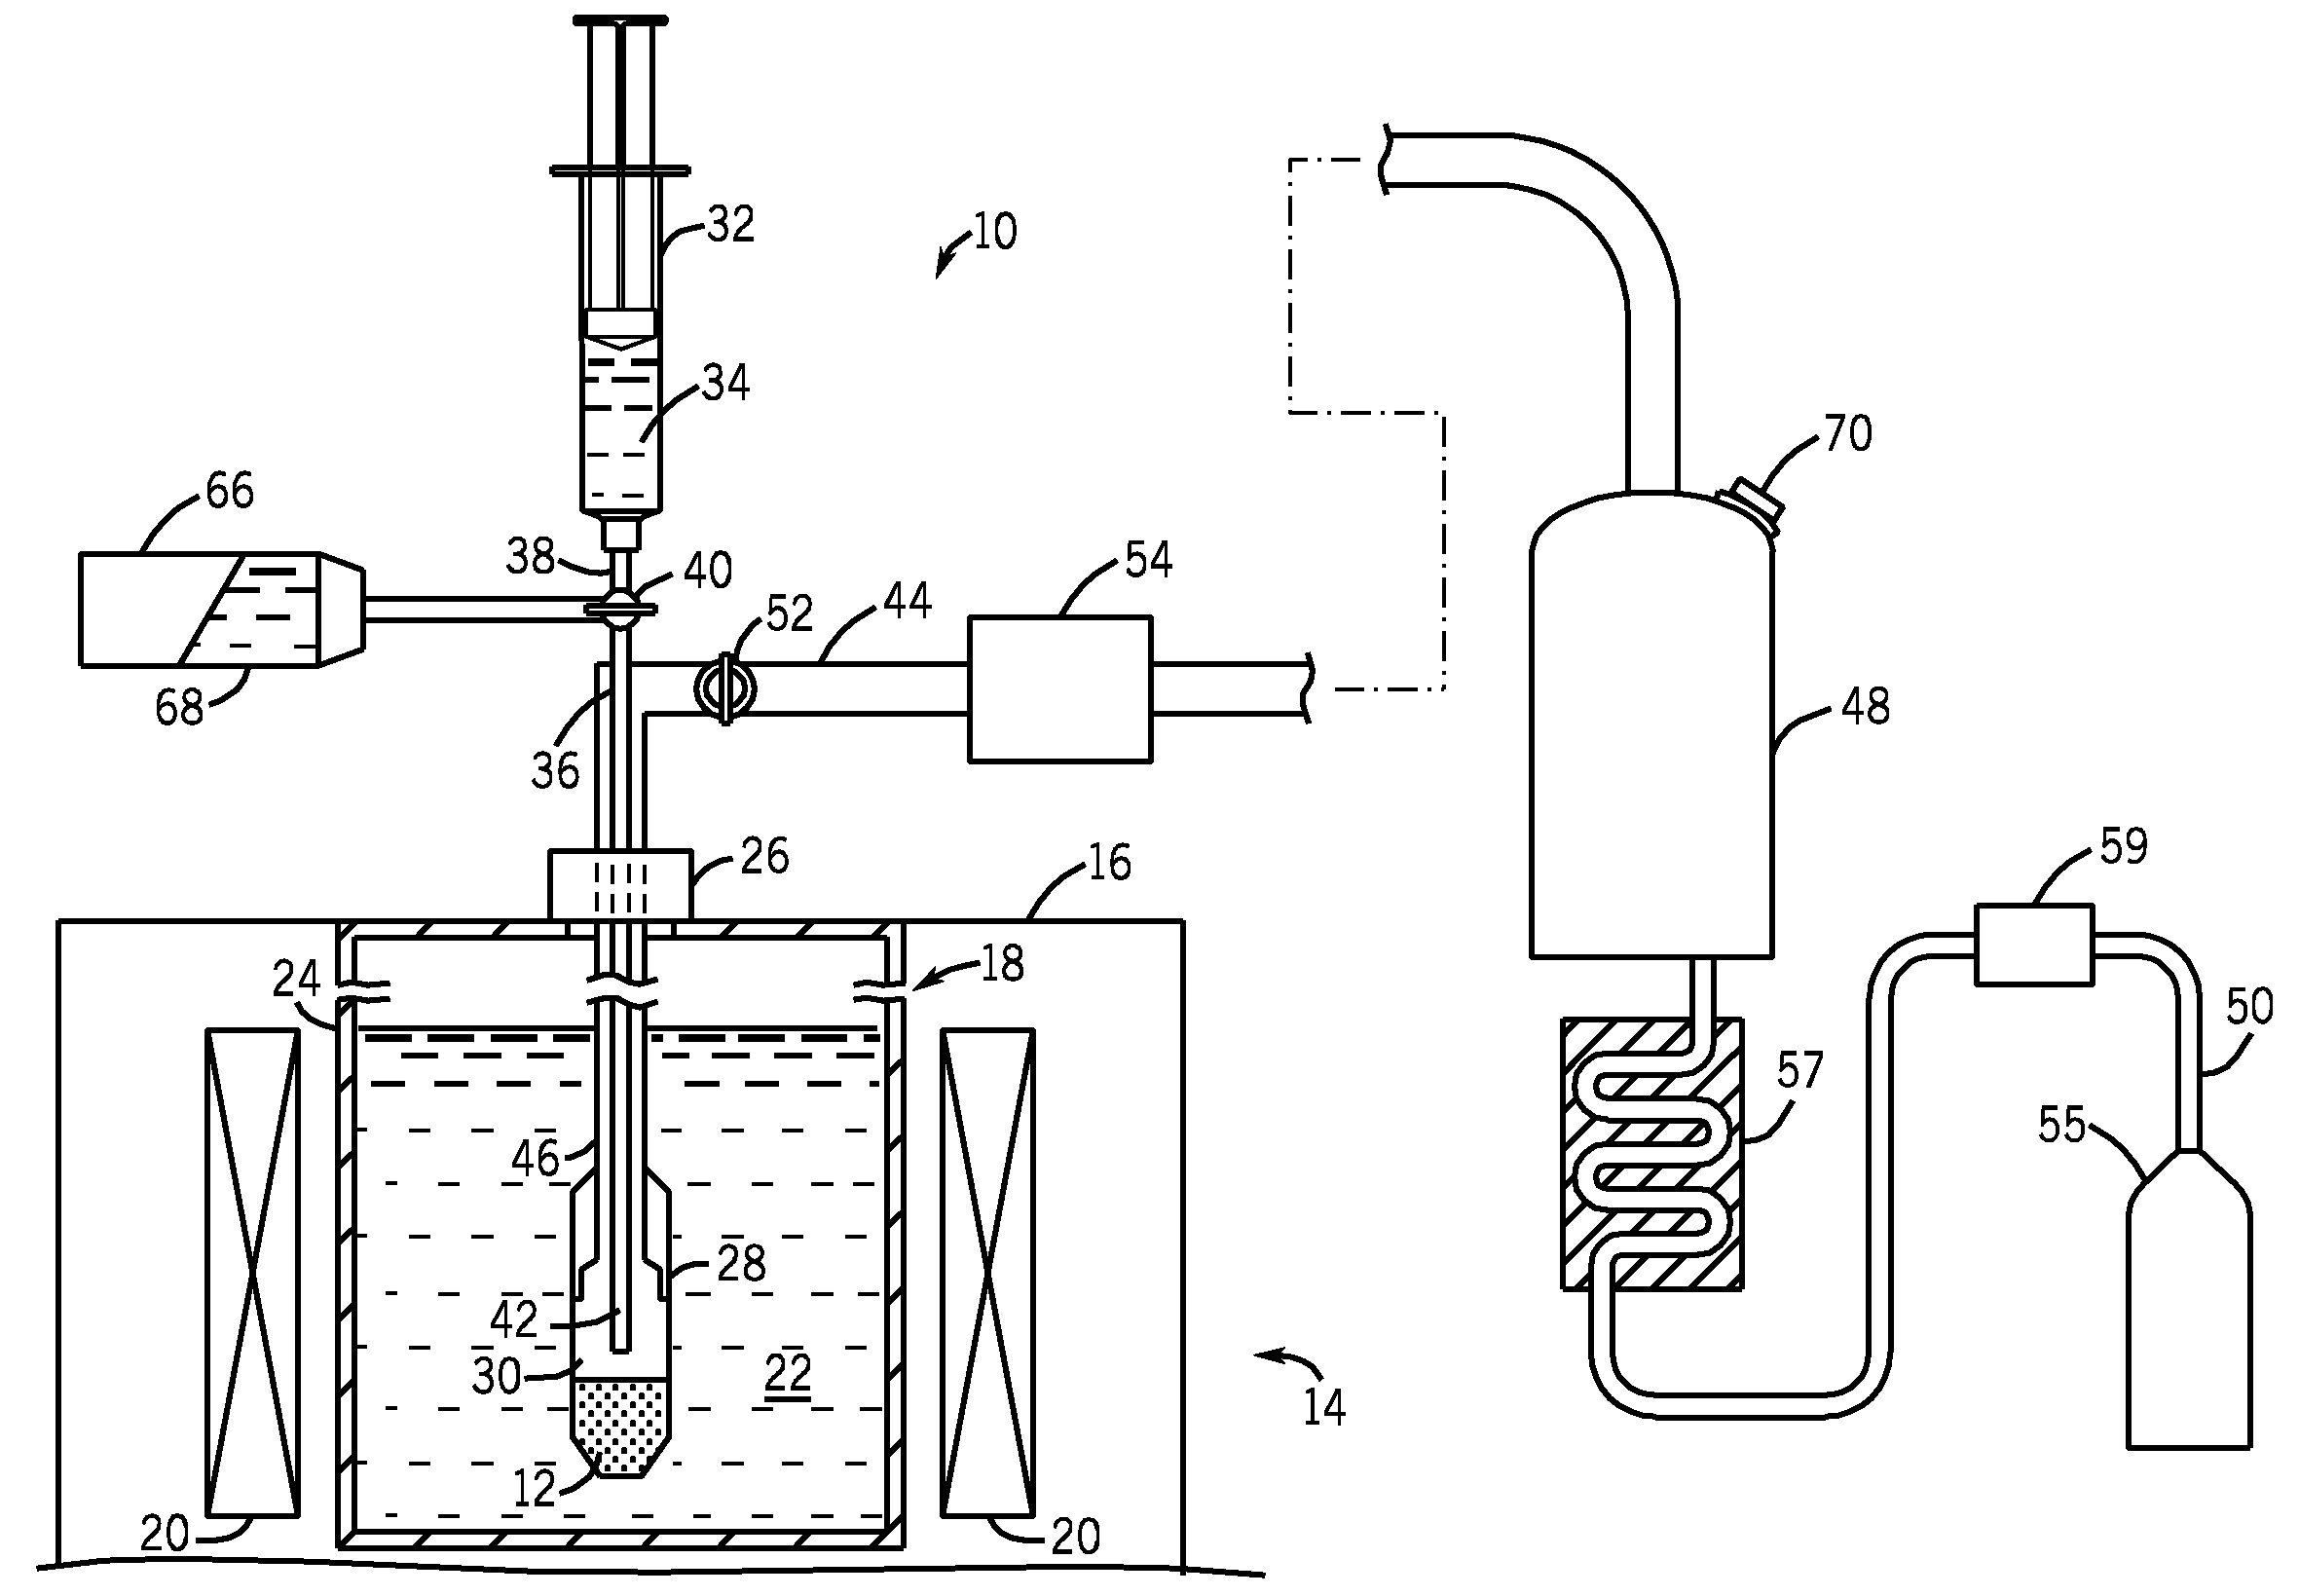 Fluid path system for dissolution and transport of a hyperpolarized material